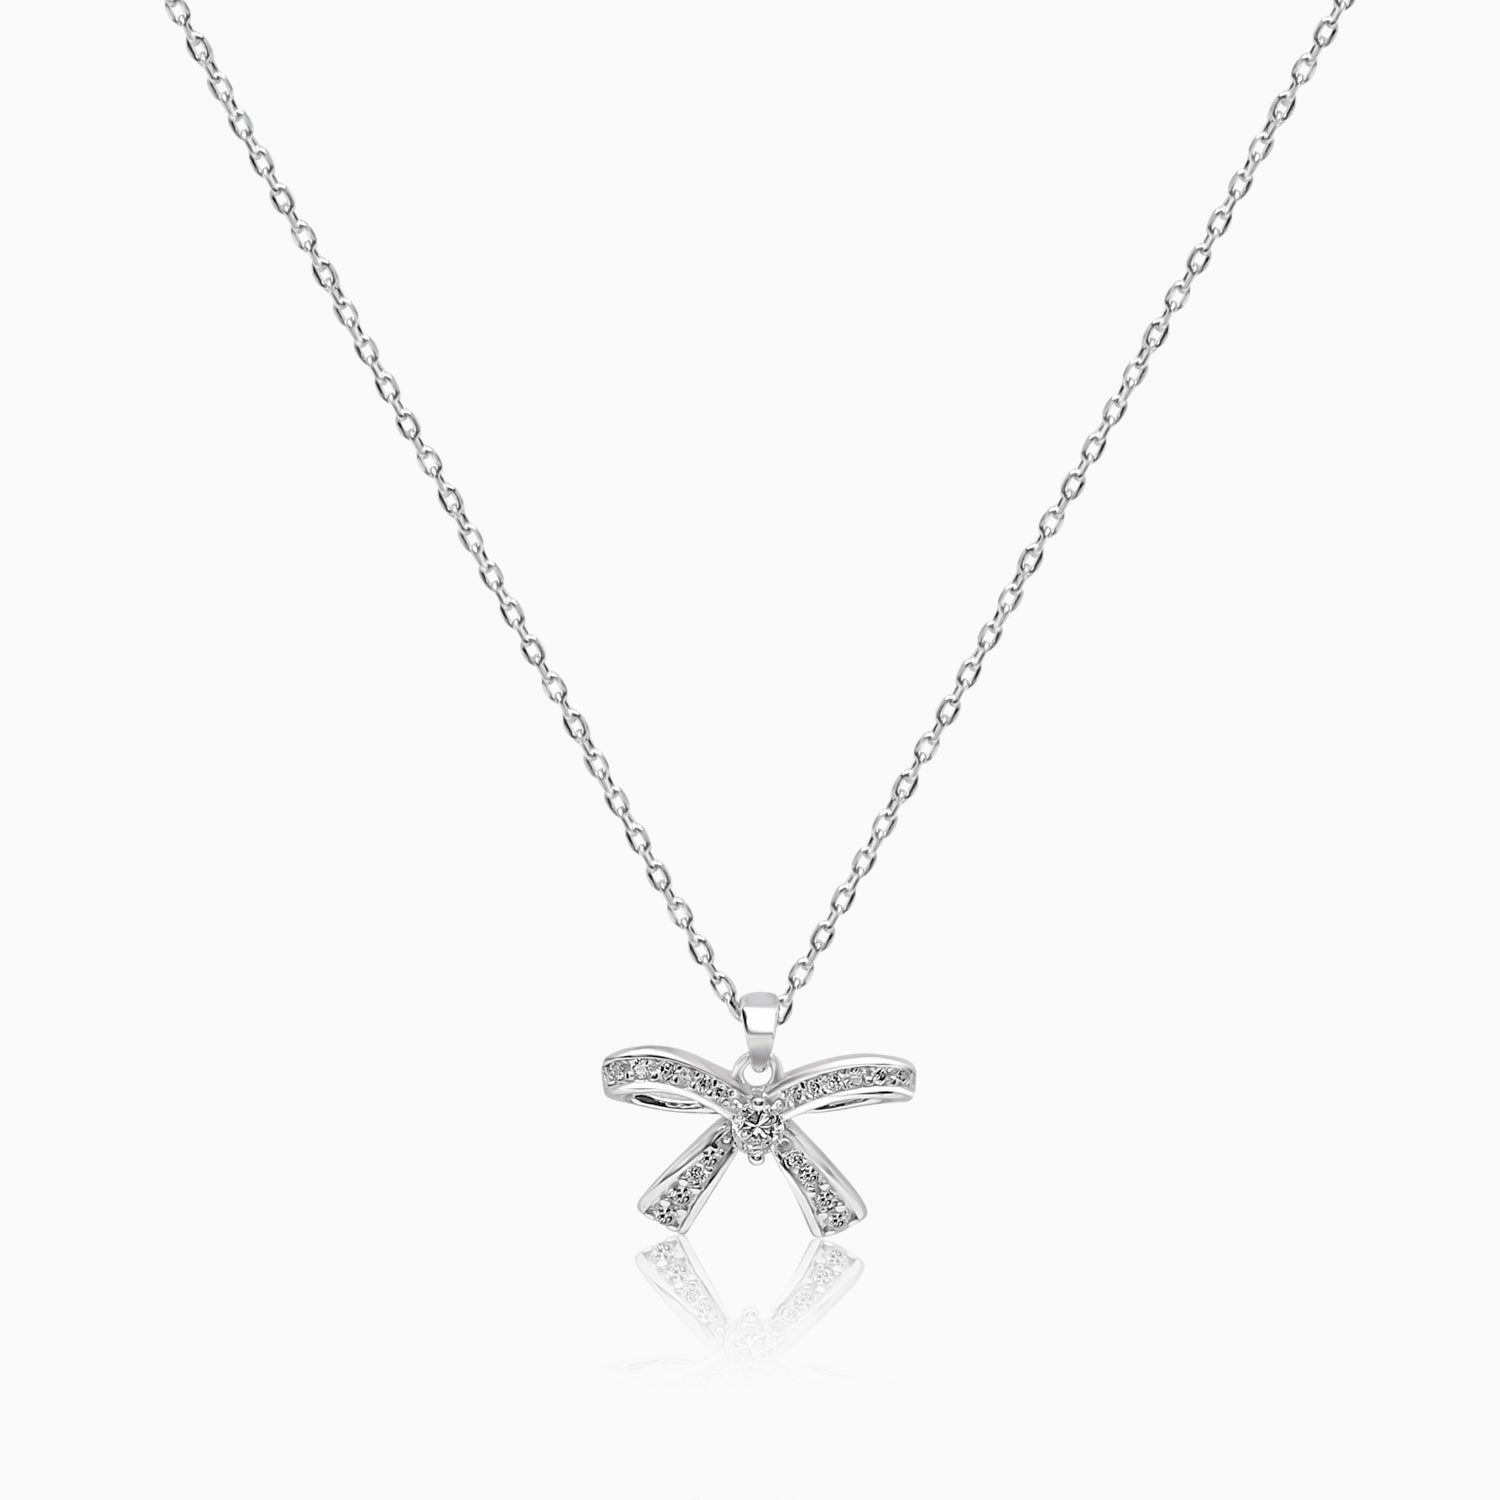 Silver Sparkling Bow Necklace